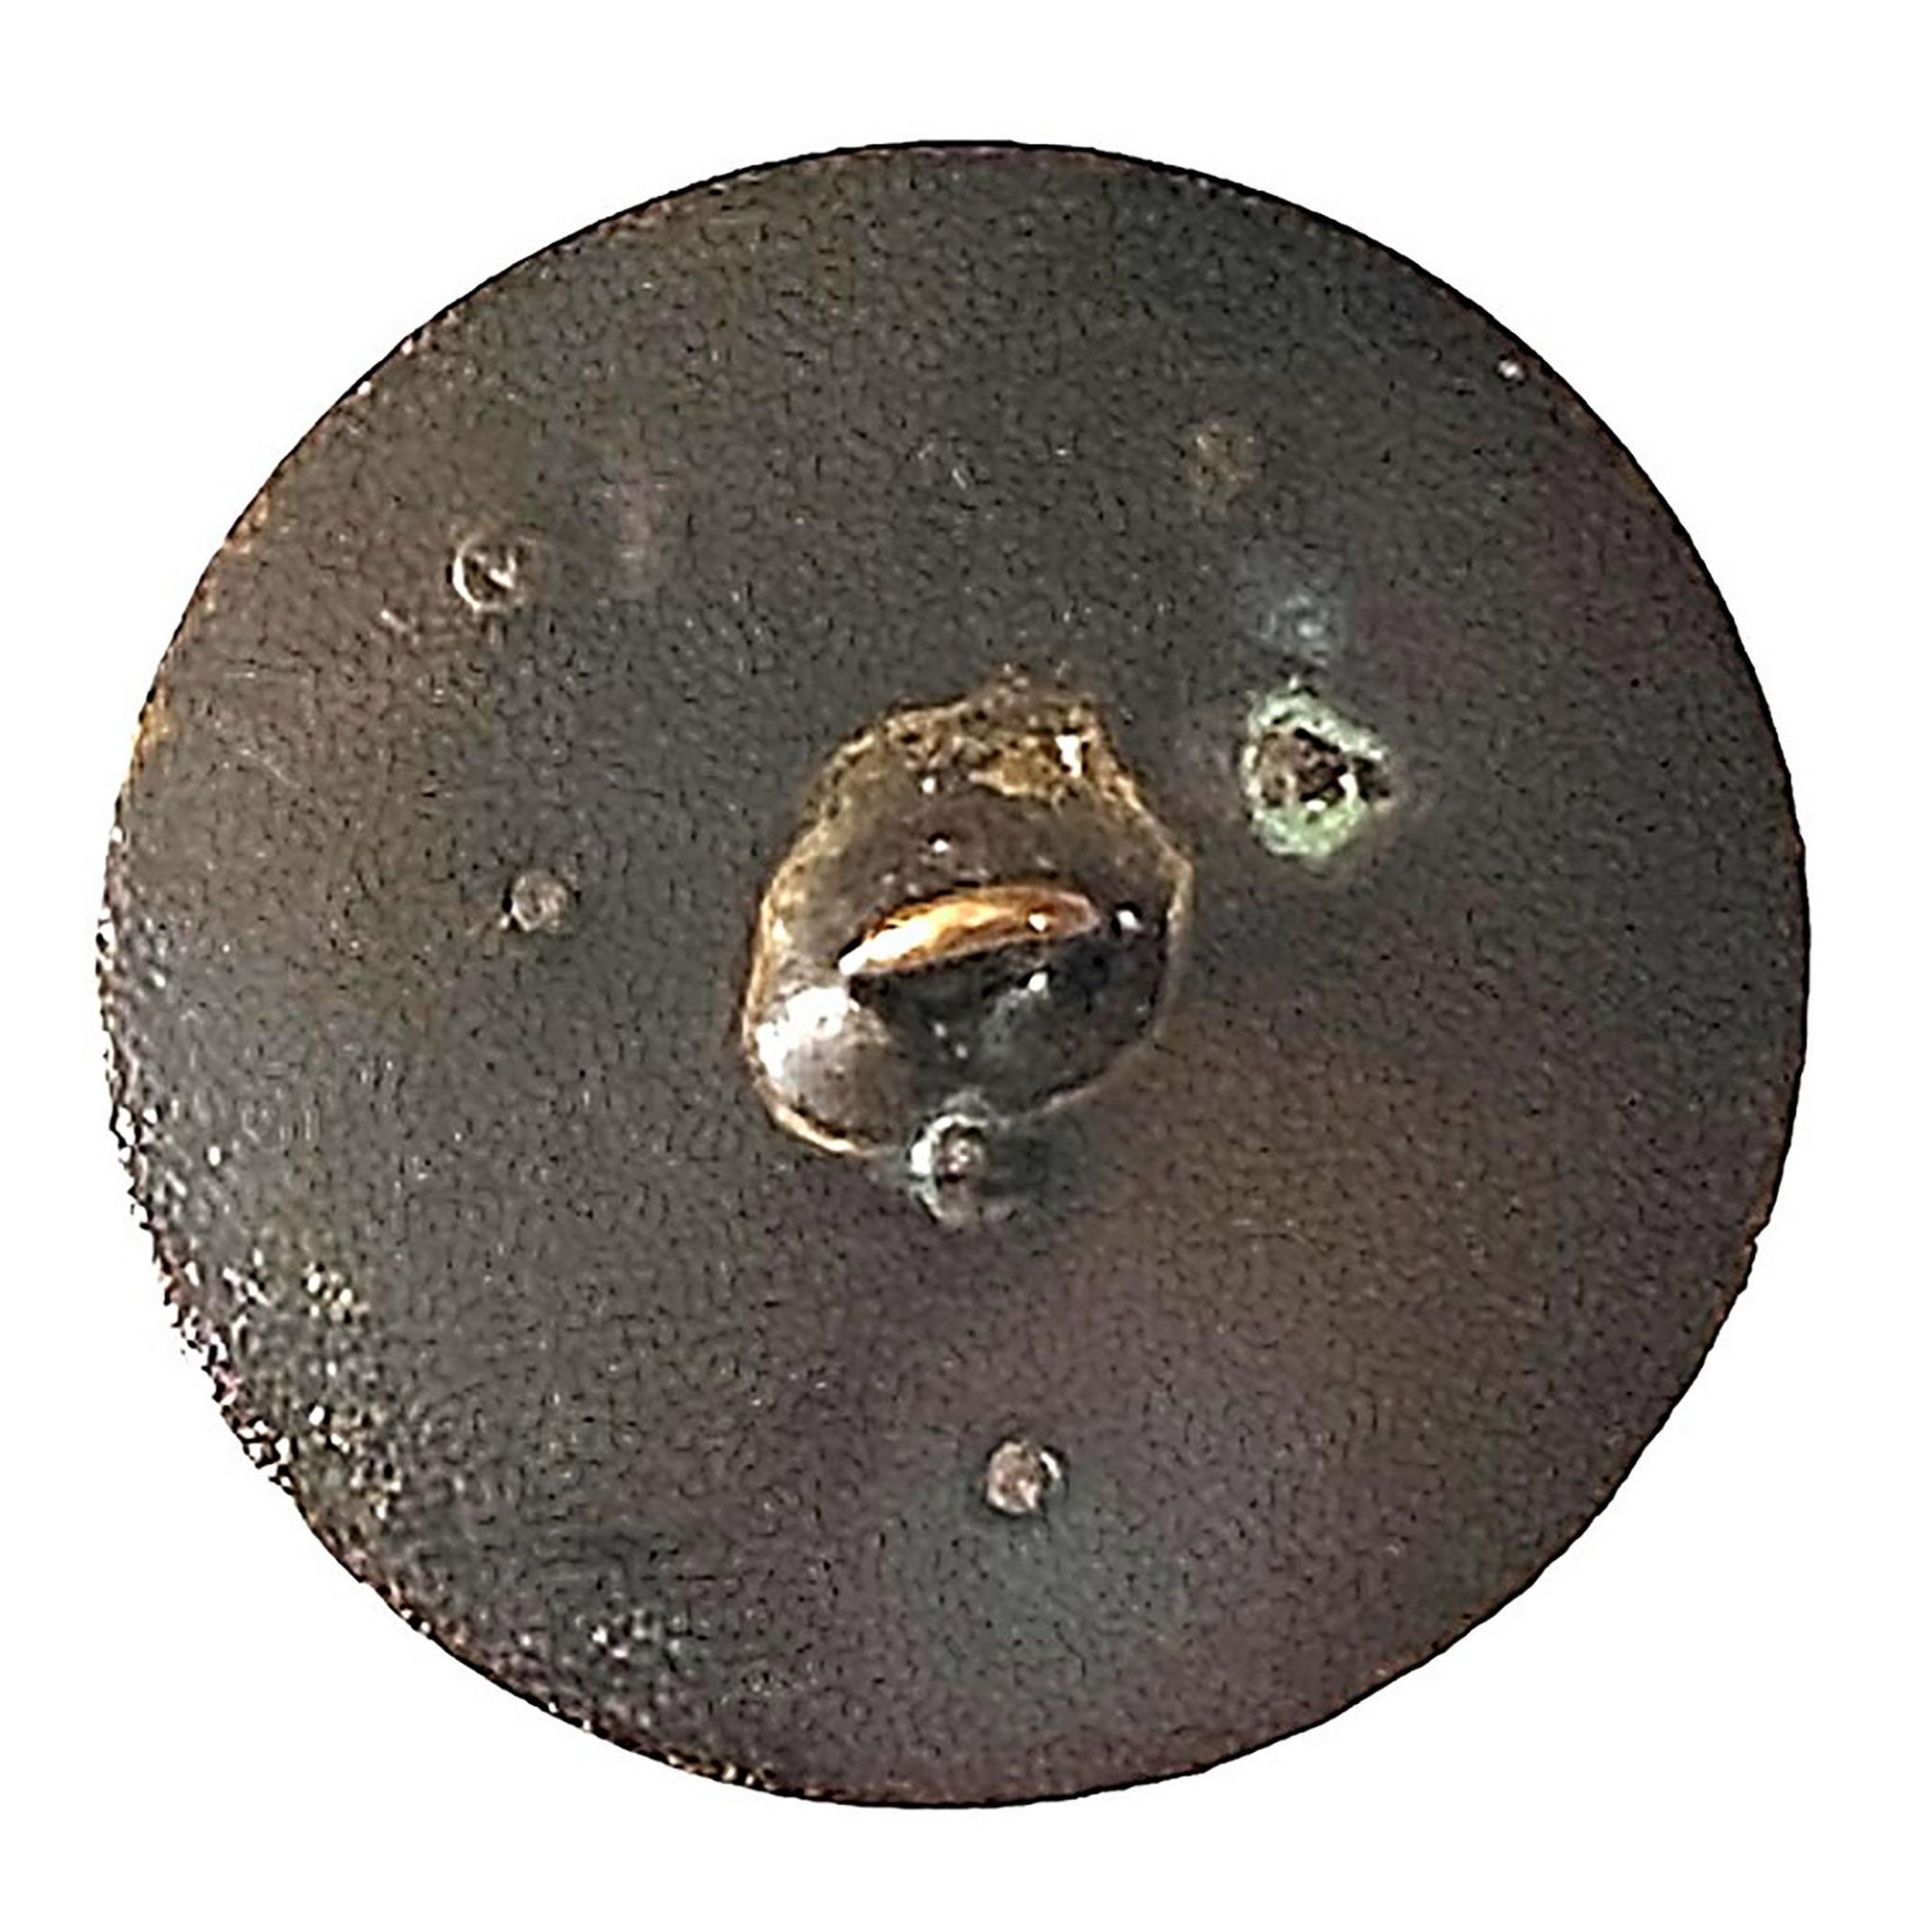 A div. 1 concave brass & steel pictorial button - Image 2 of 2